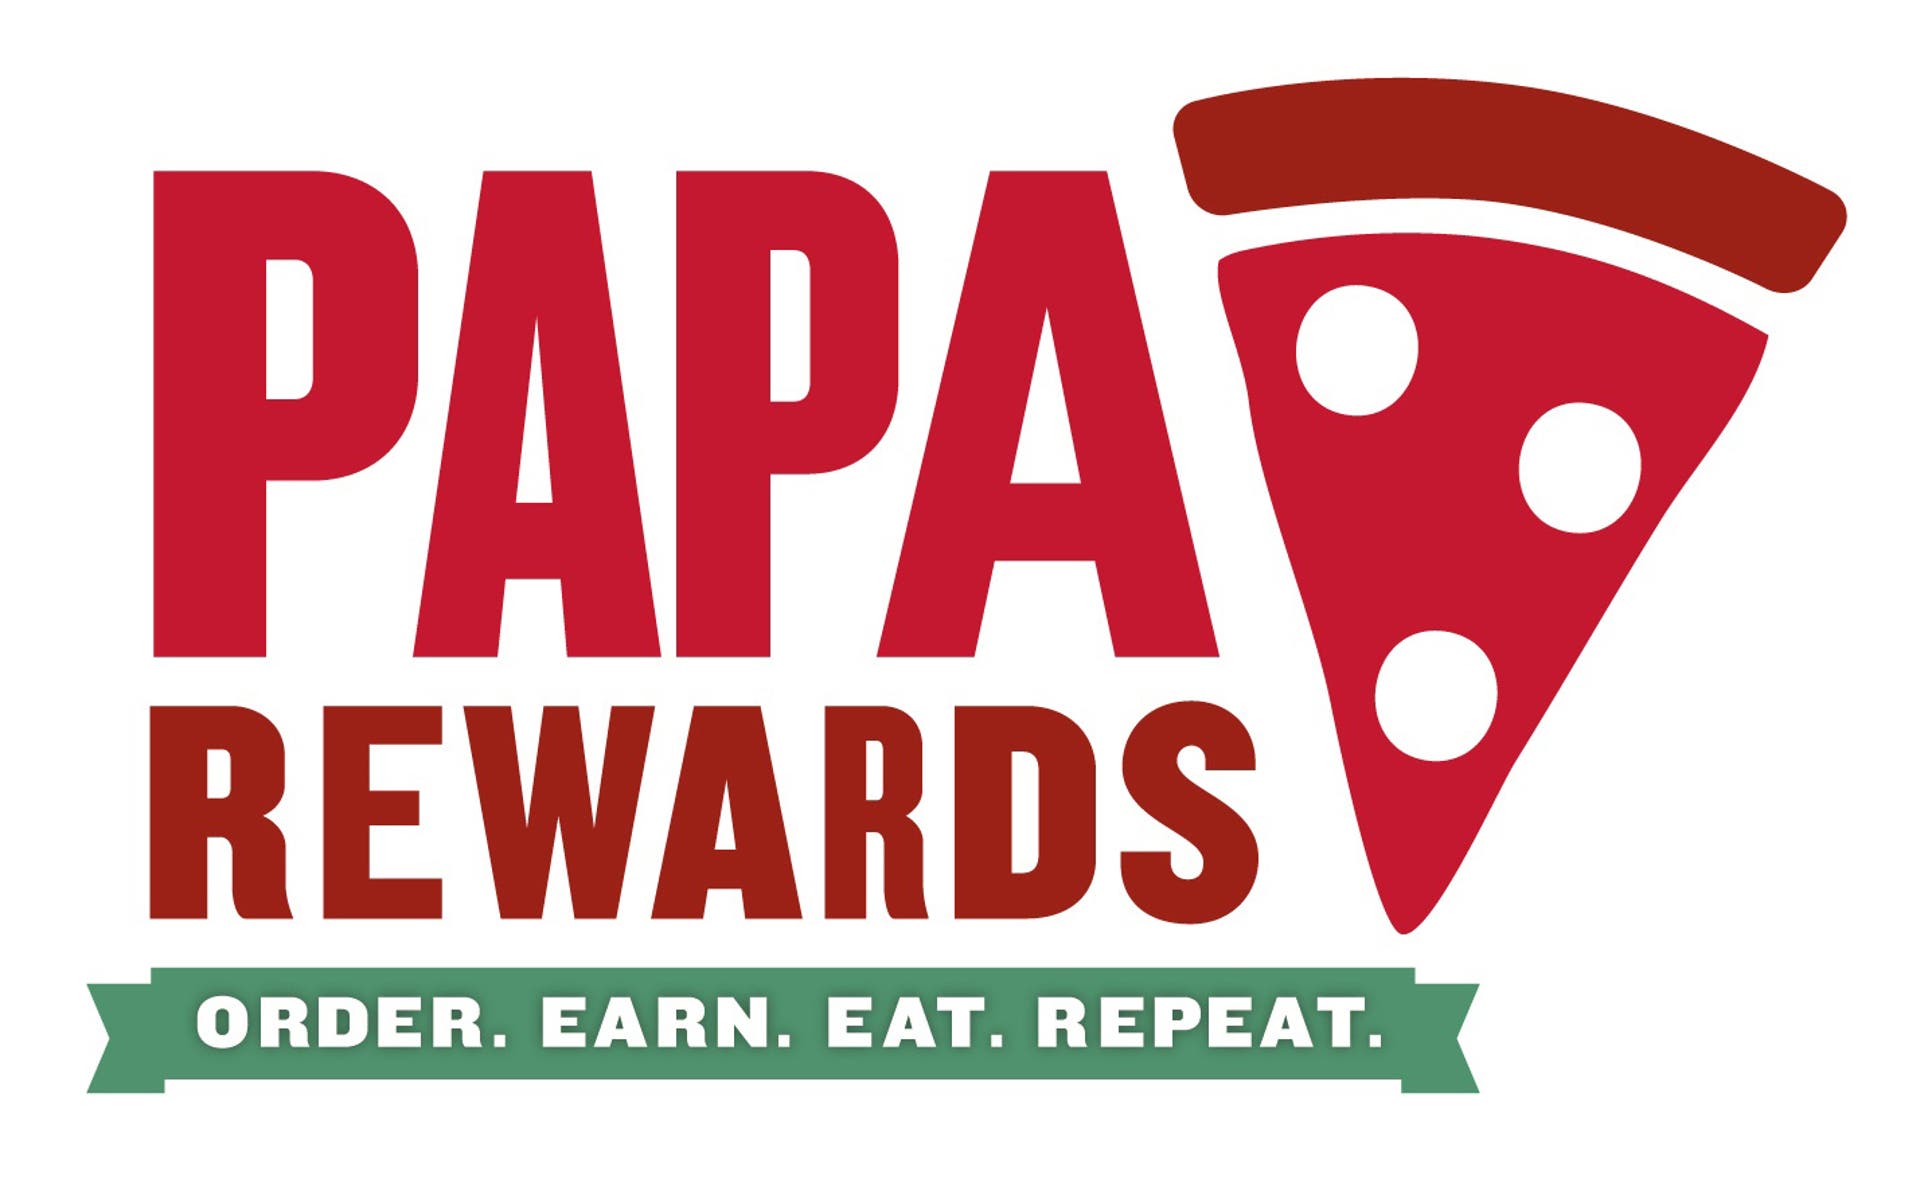  The Papa Johns rewards scheme logo with the slogan "Order. Earn. Eat. Repeat" 